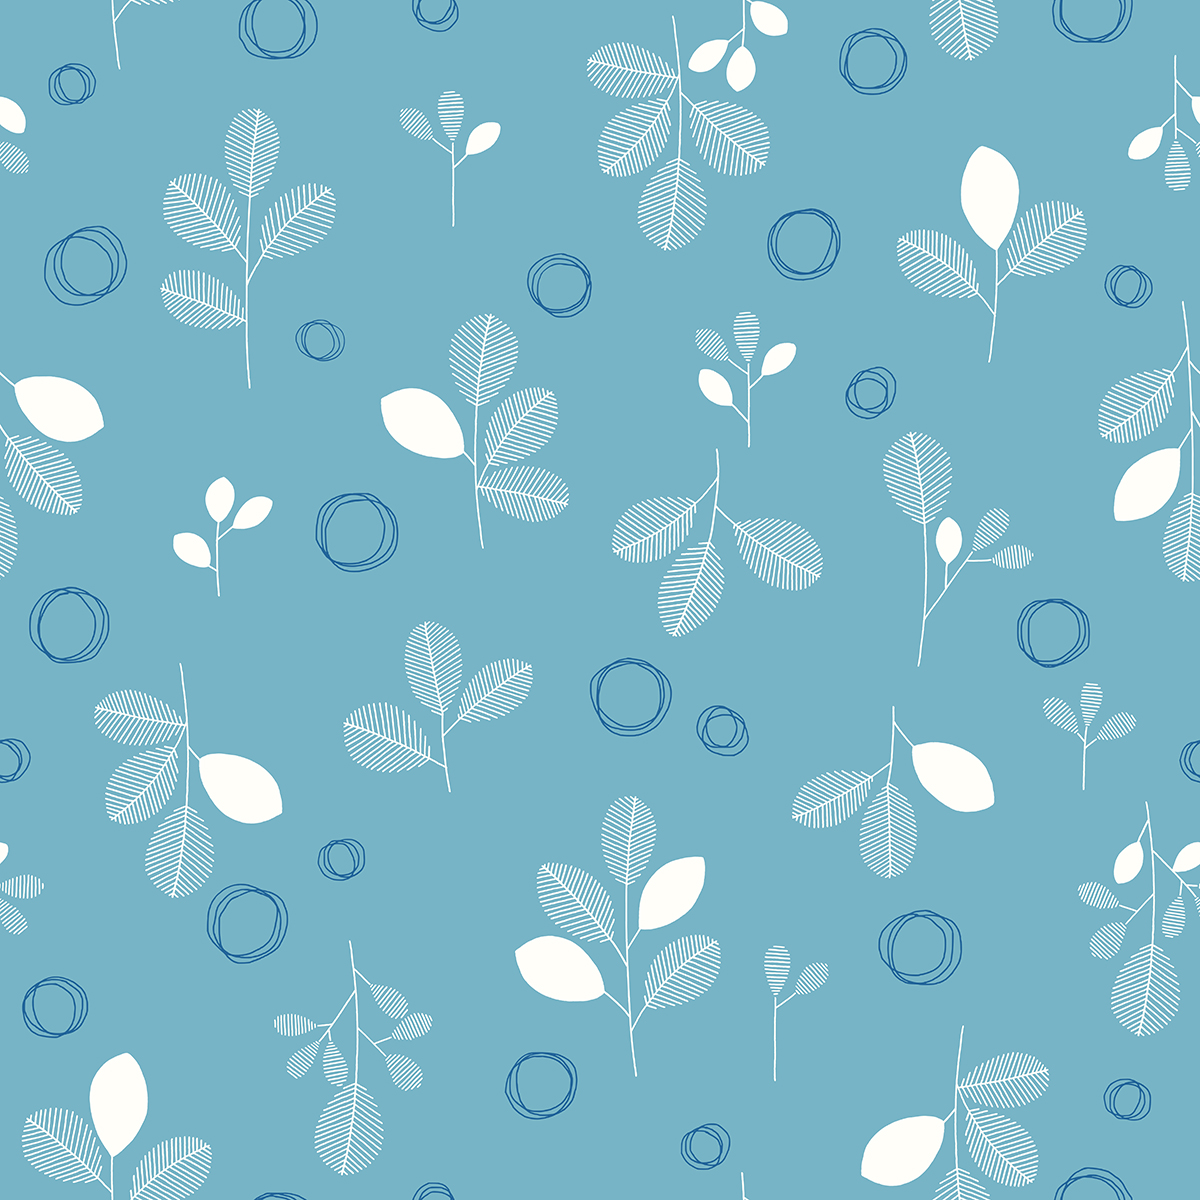 A blue and white pattern with white leaves and circles